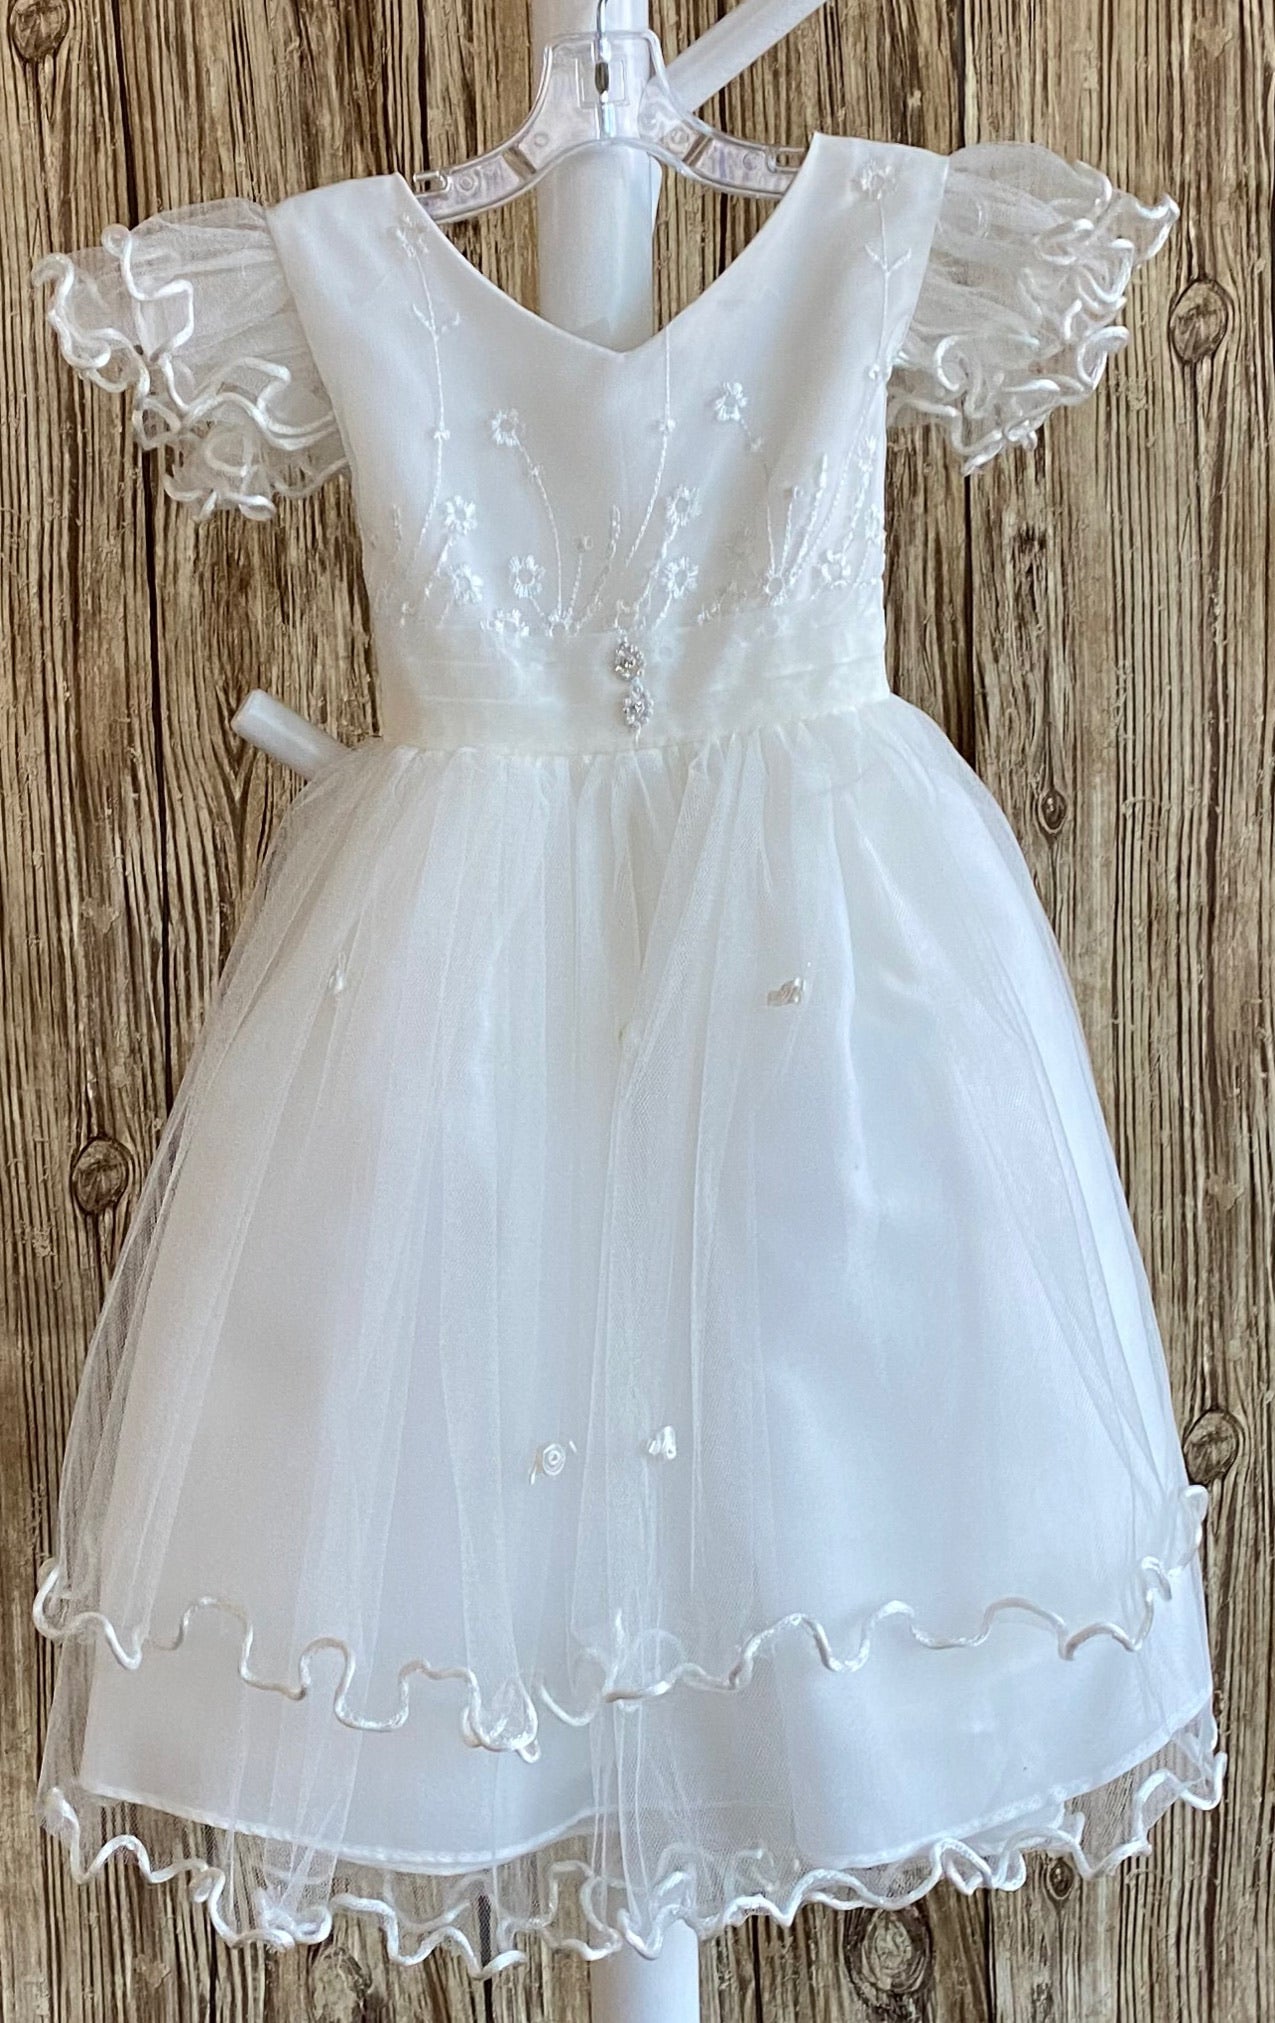 This a beautiful, one-of-a-kind baptism gown.  A lovely gown for a precious child.  White, size 12M Lettuce edge tulle sleeves Satin V-neck bodice with embroidered flowers 2 rhinestone flowers placed on middle of bodice edge Lace skirting with lettuce edge Roses placed throughout skirting 